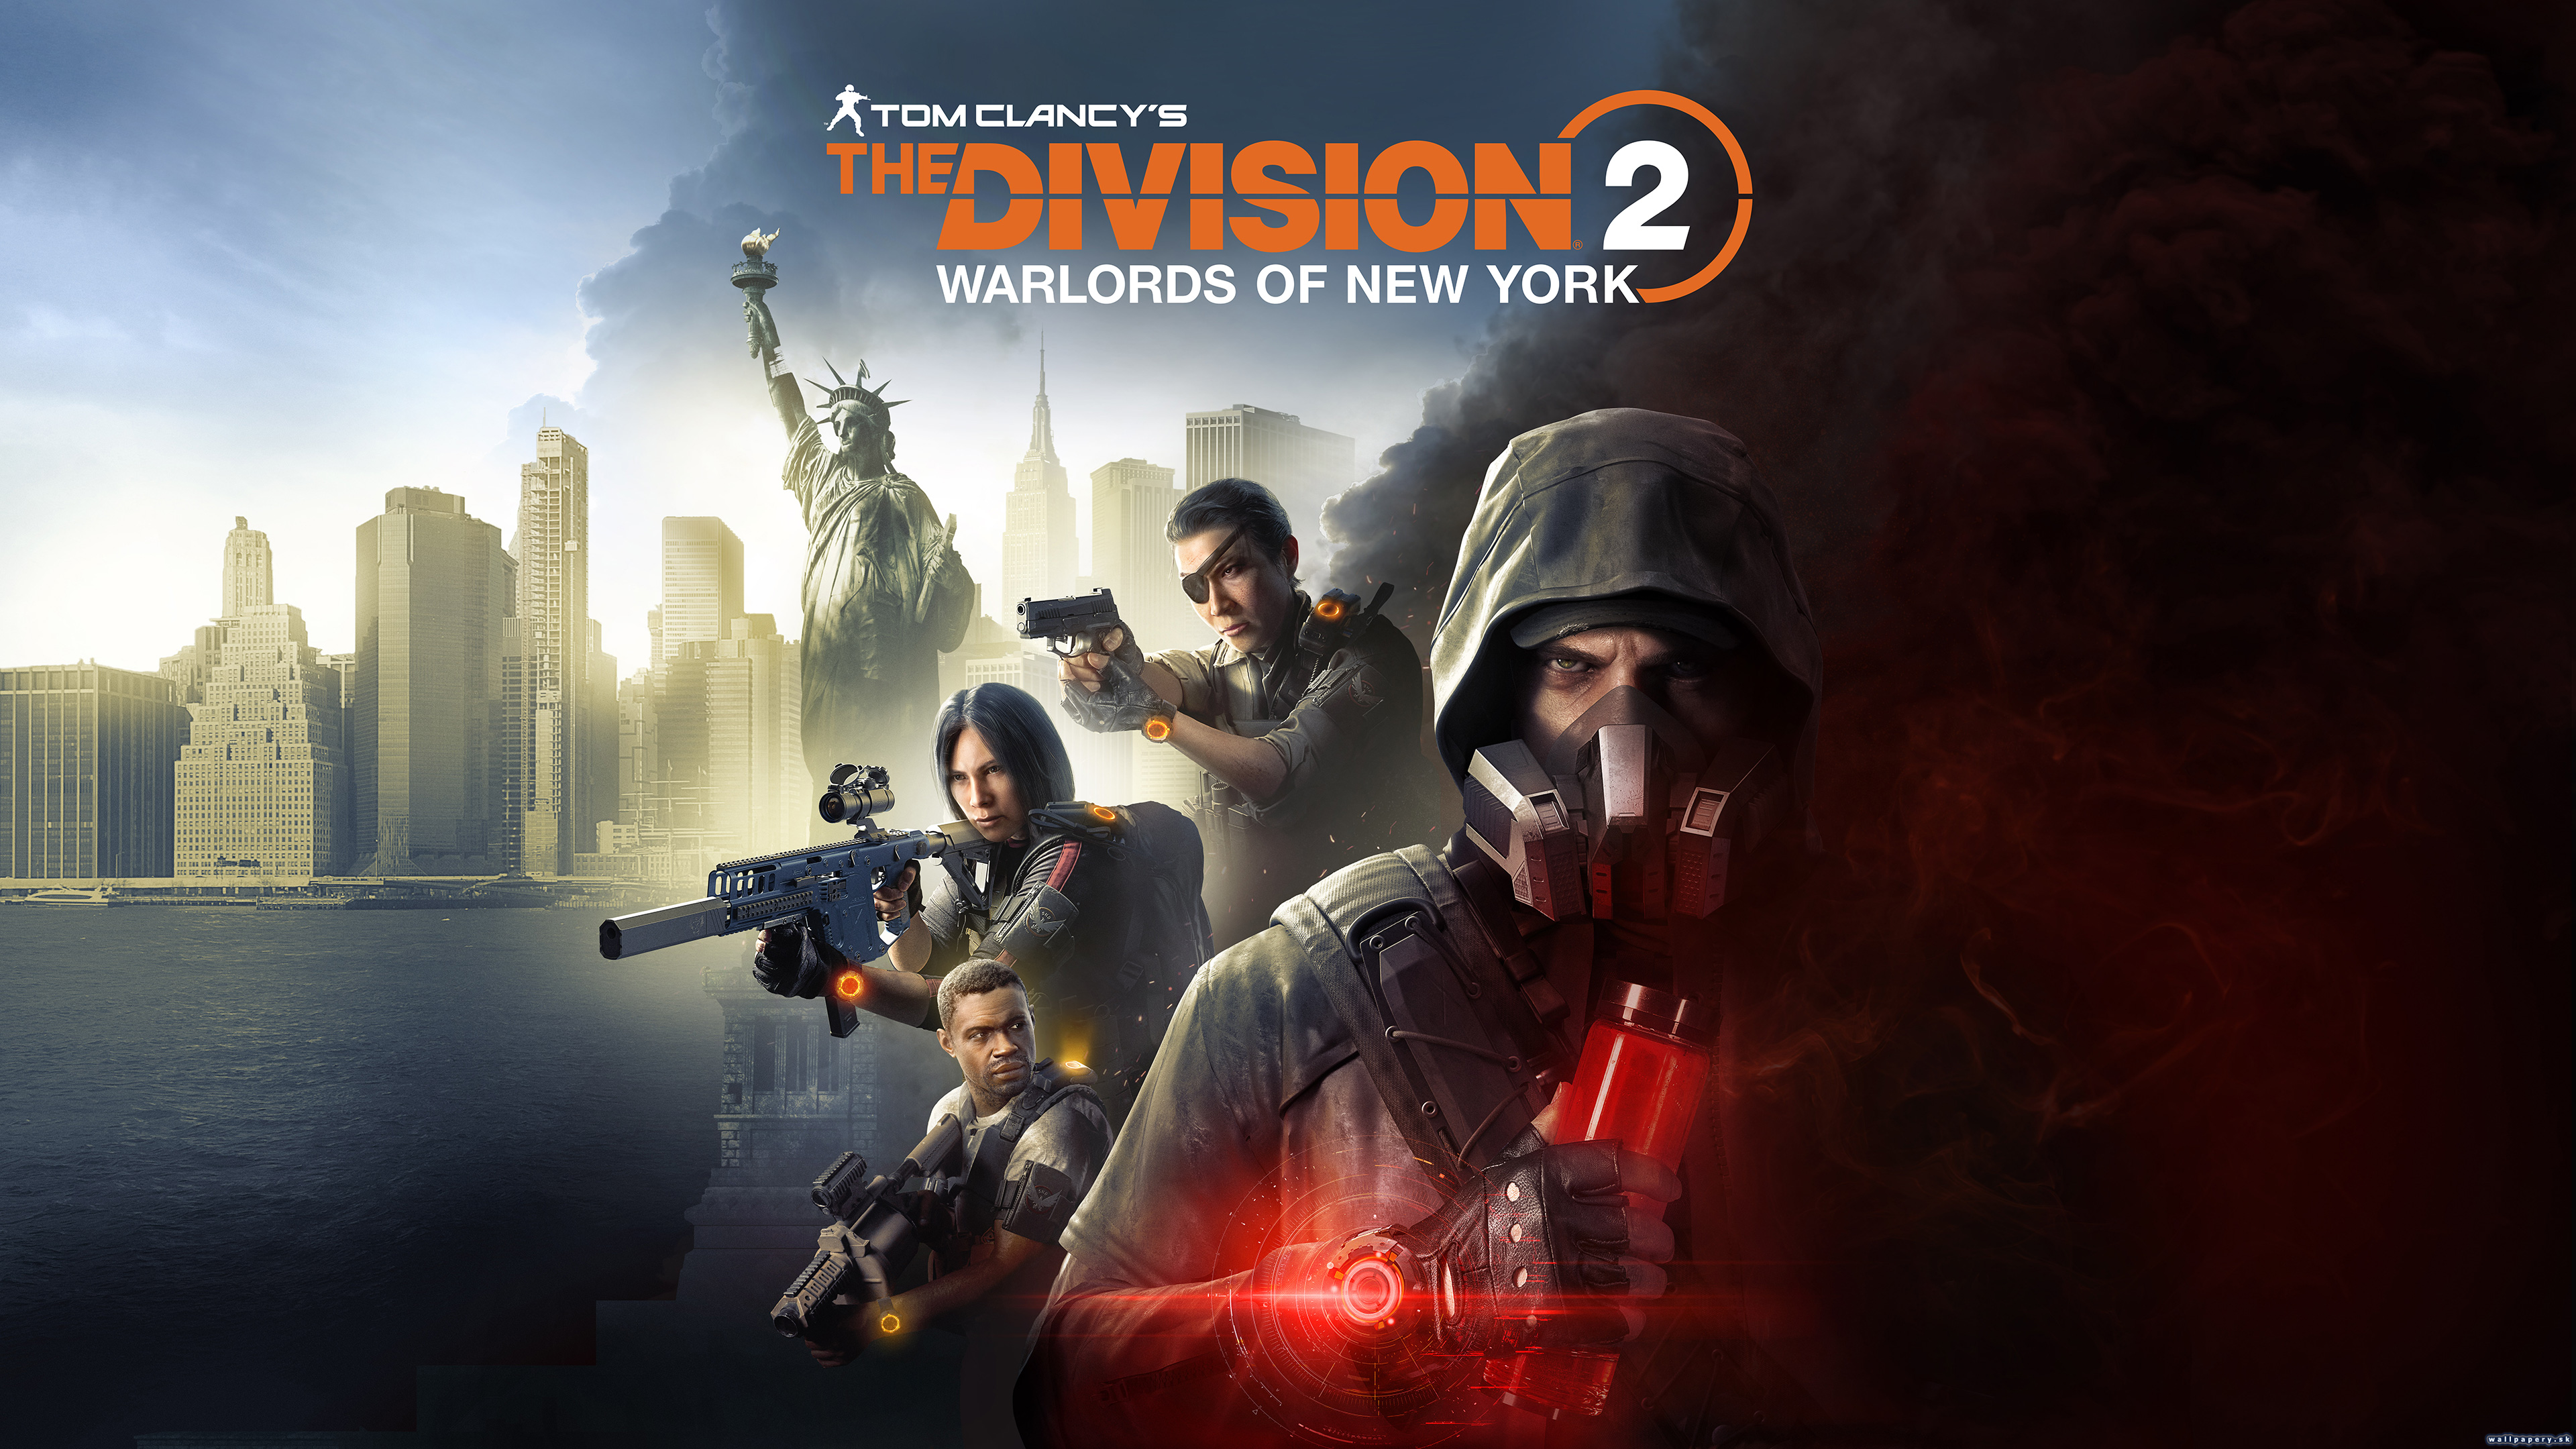 The Division 2: Warlords of New York - wallpaper 2